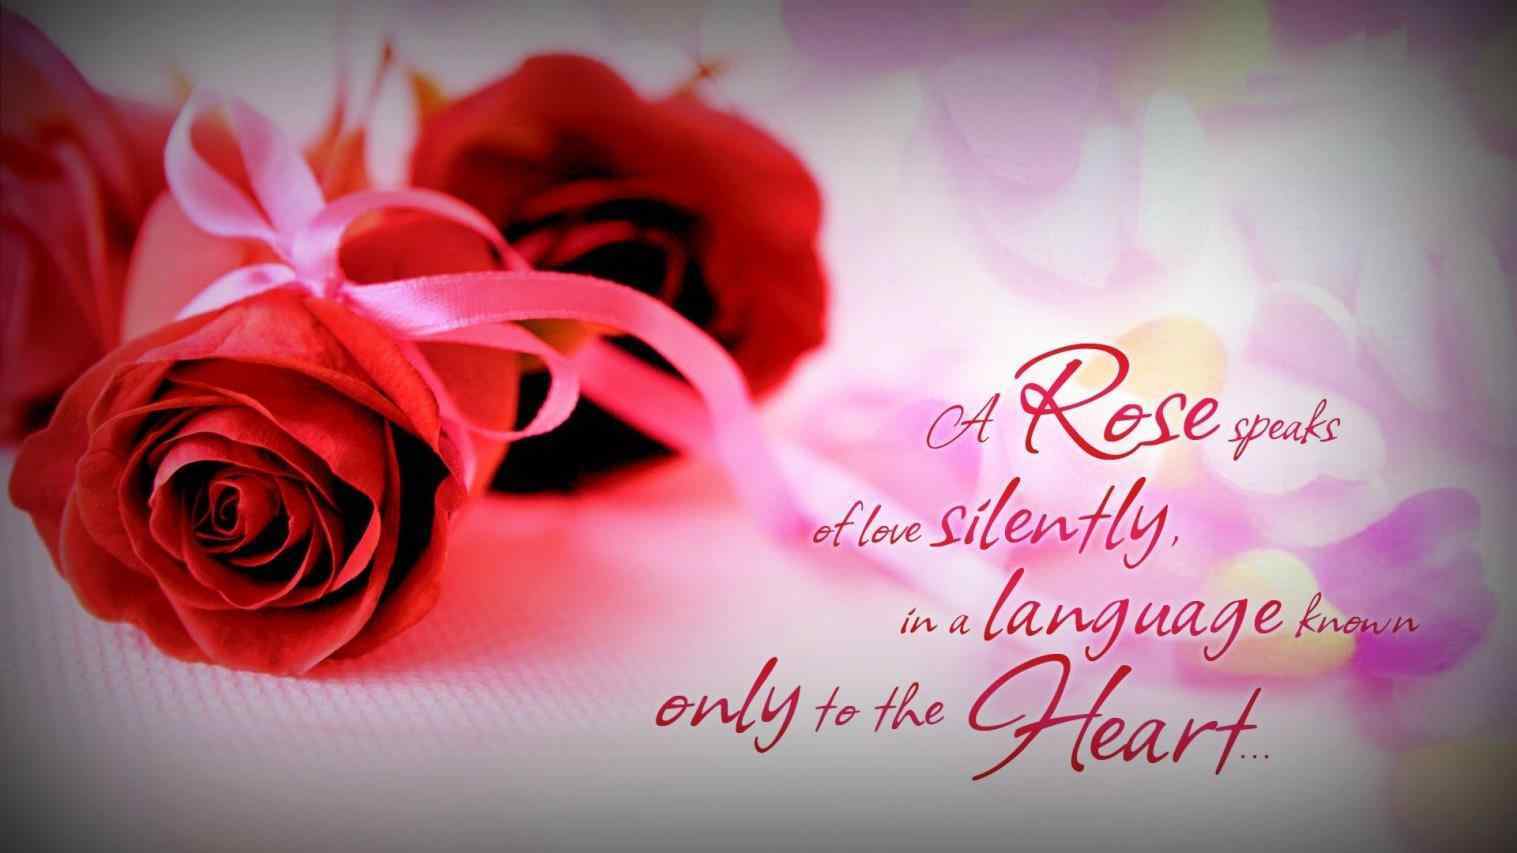 image Quotes About Red Roses Of Roses With Quotes Tags Rose